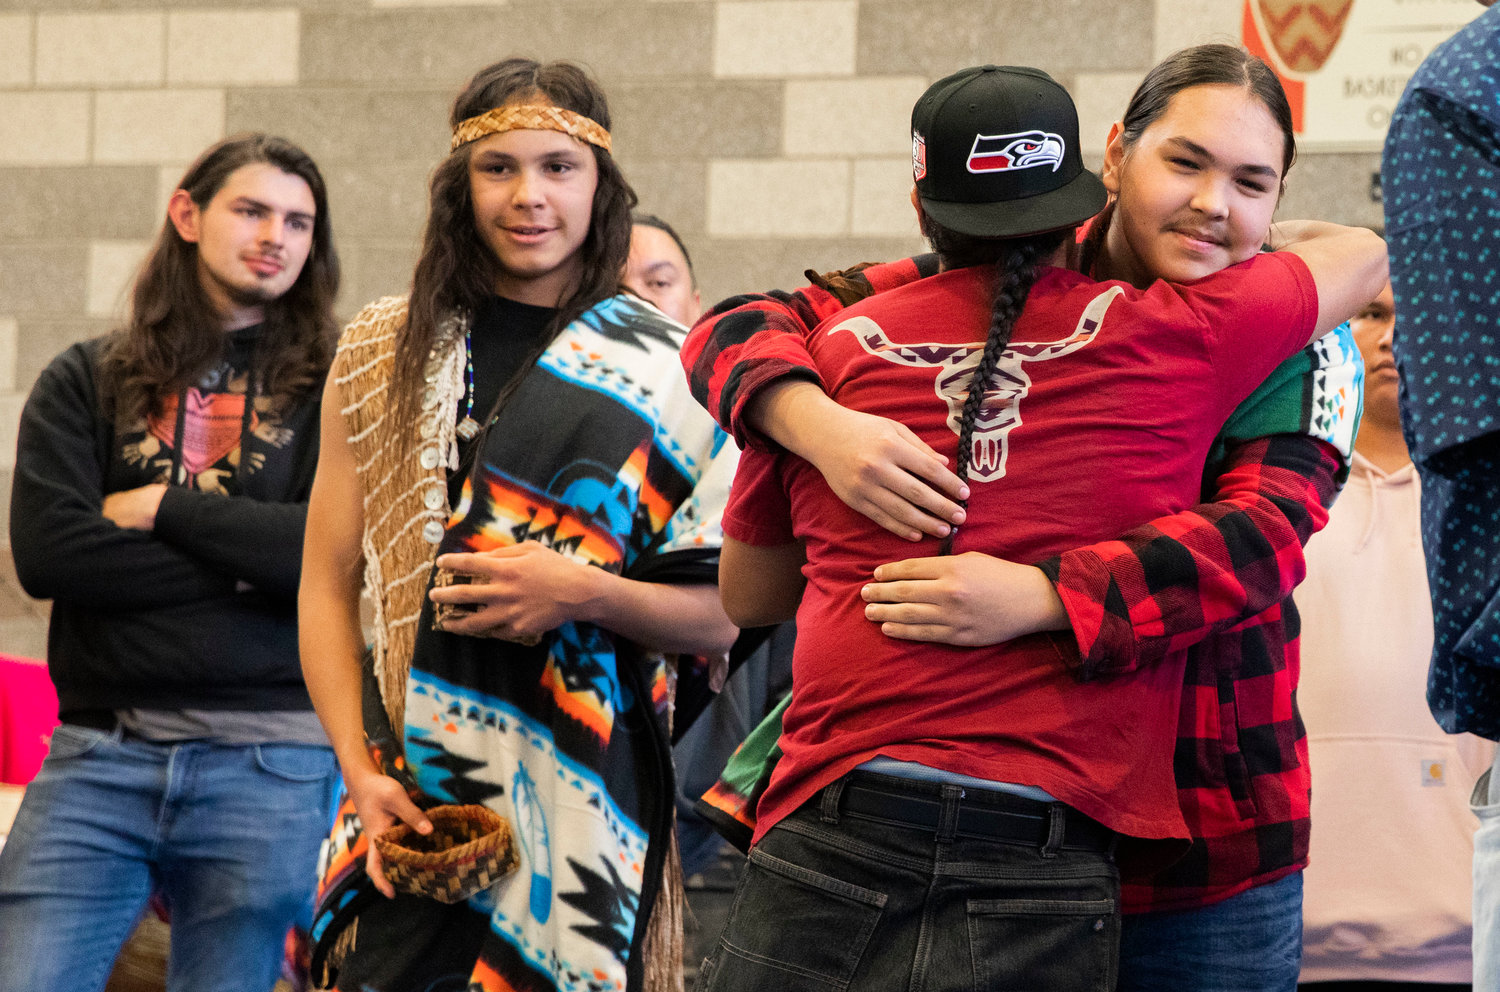 “Junior,” or Aholagana Komakhuk, receives an embrace during a ceremony honoring the Hazel Pete legacy alongside his brother “William” or Agugaluk Komakhuk at the Chehalis Tribe Community Center in Oakville on Saturday.